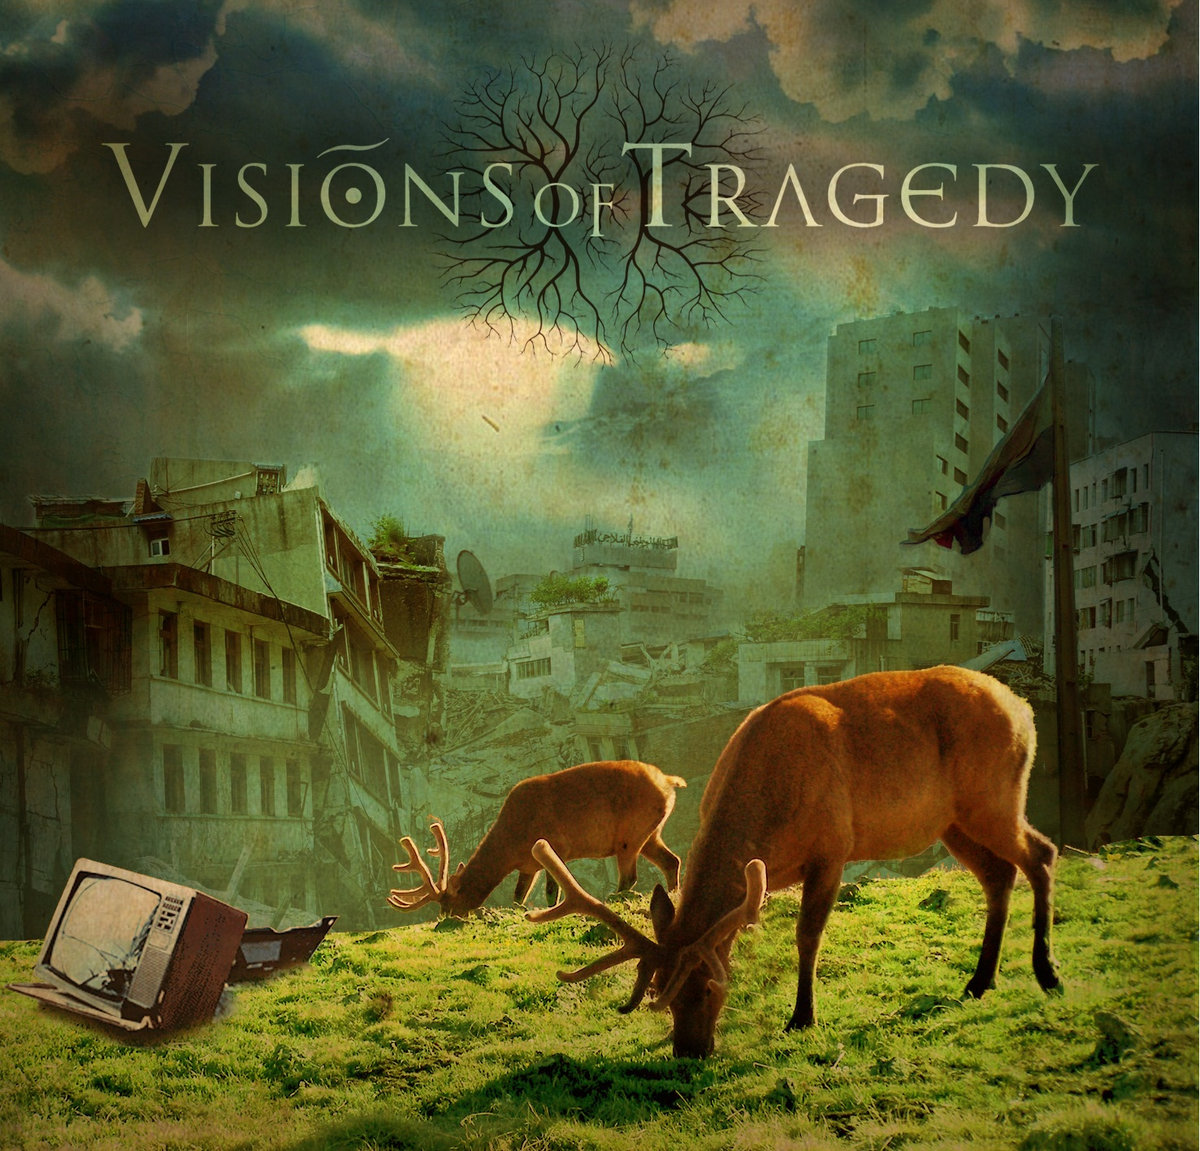 Cover of the album visions of tragedy. Dystopic city with deer grazing.